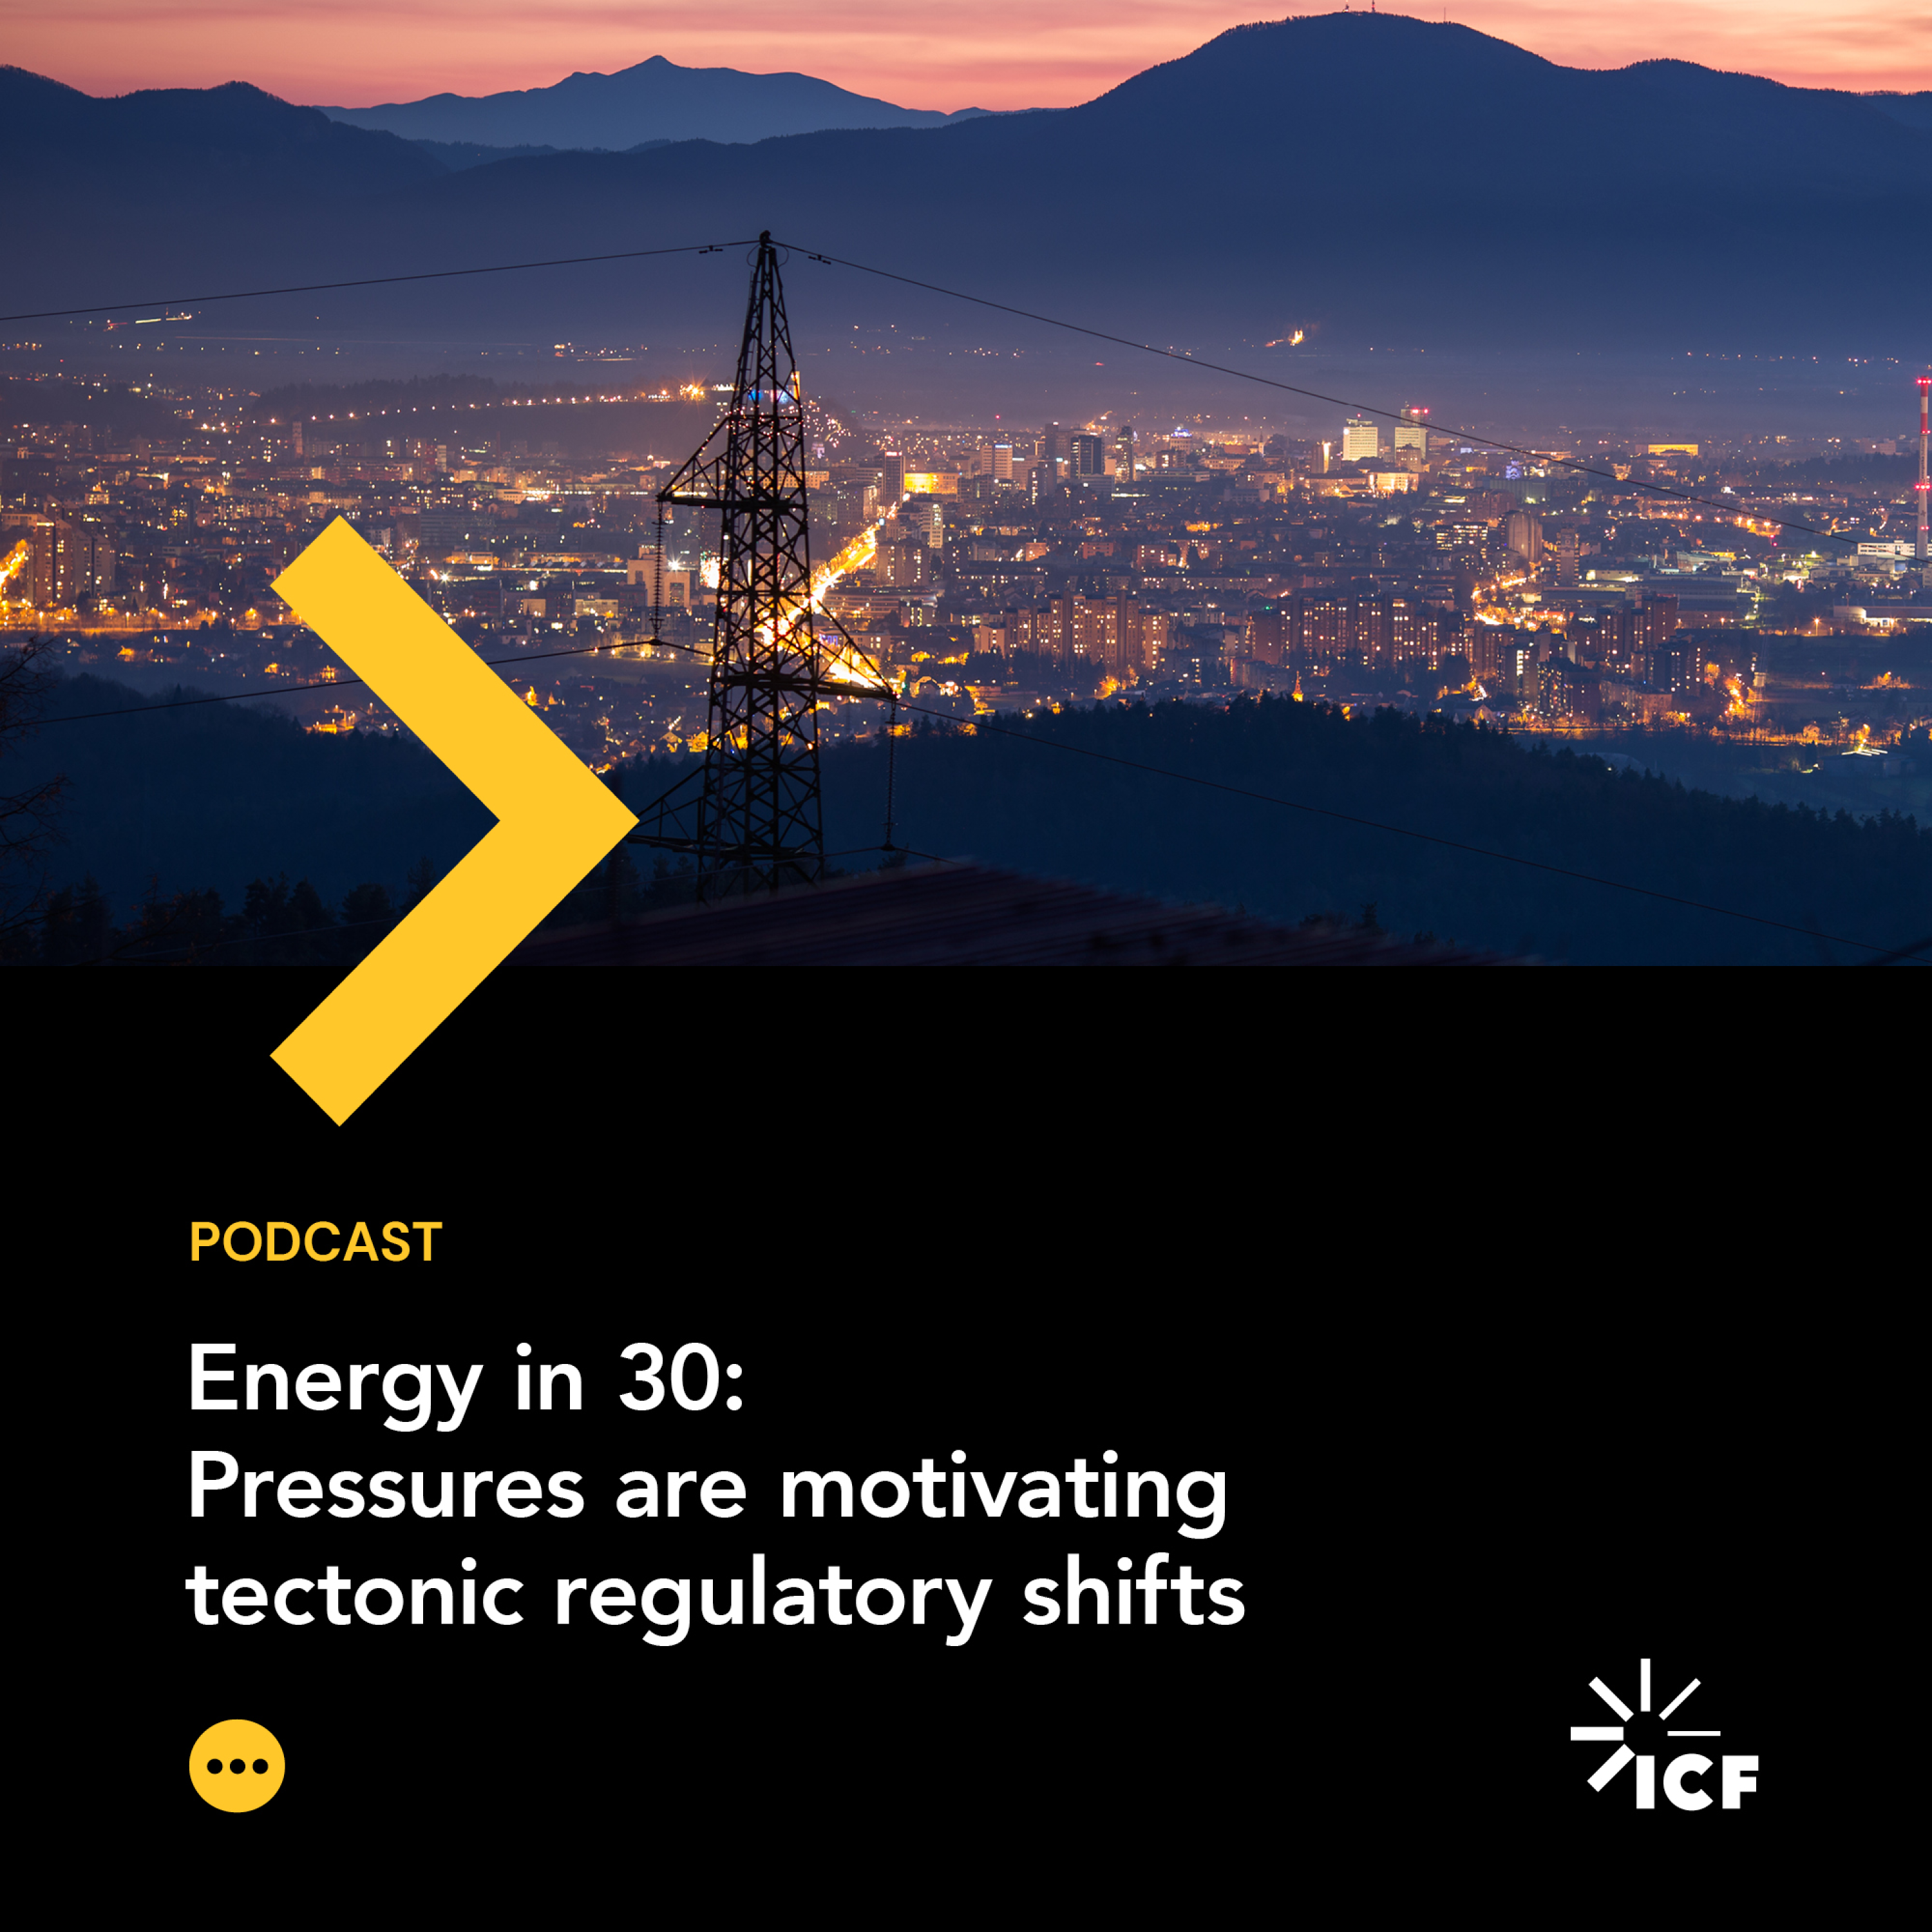 Energy in 30 #3: Pressures are motivating tectonic regulatory shifts